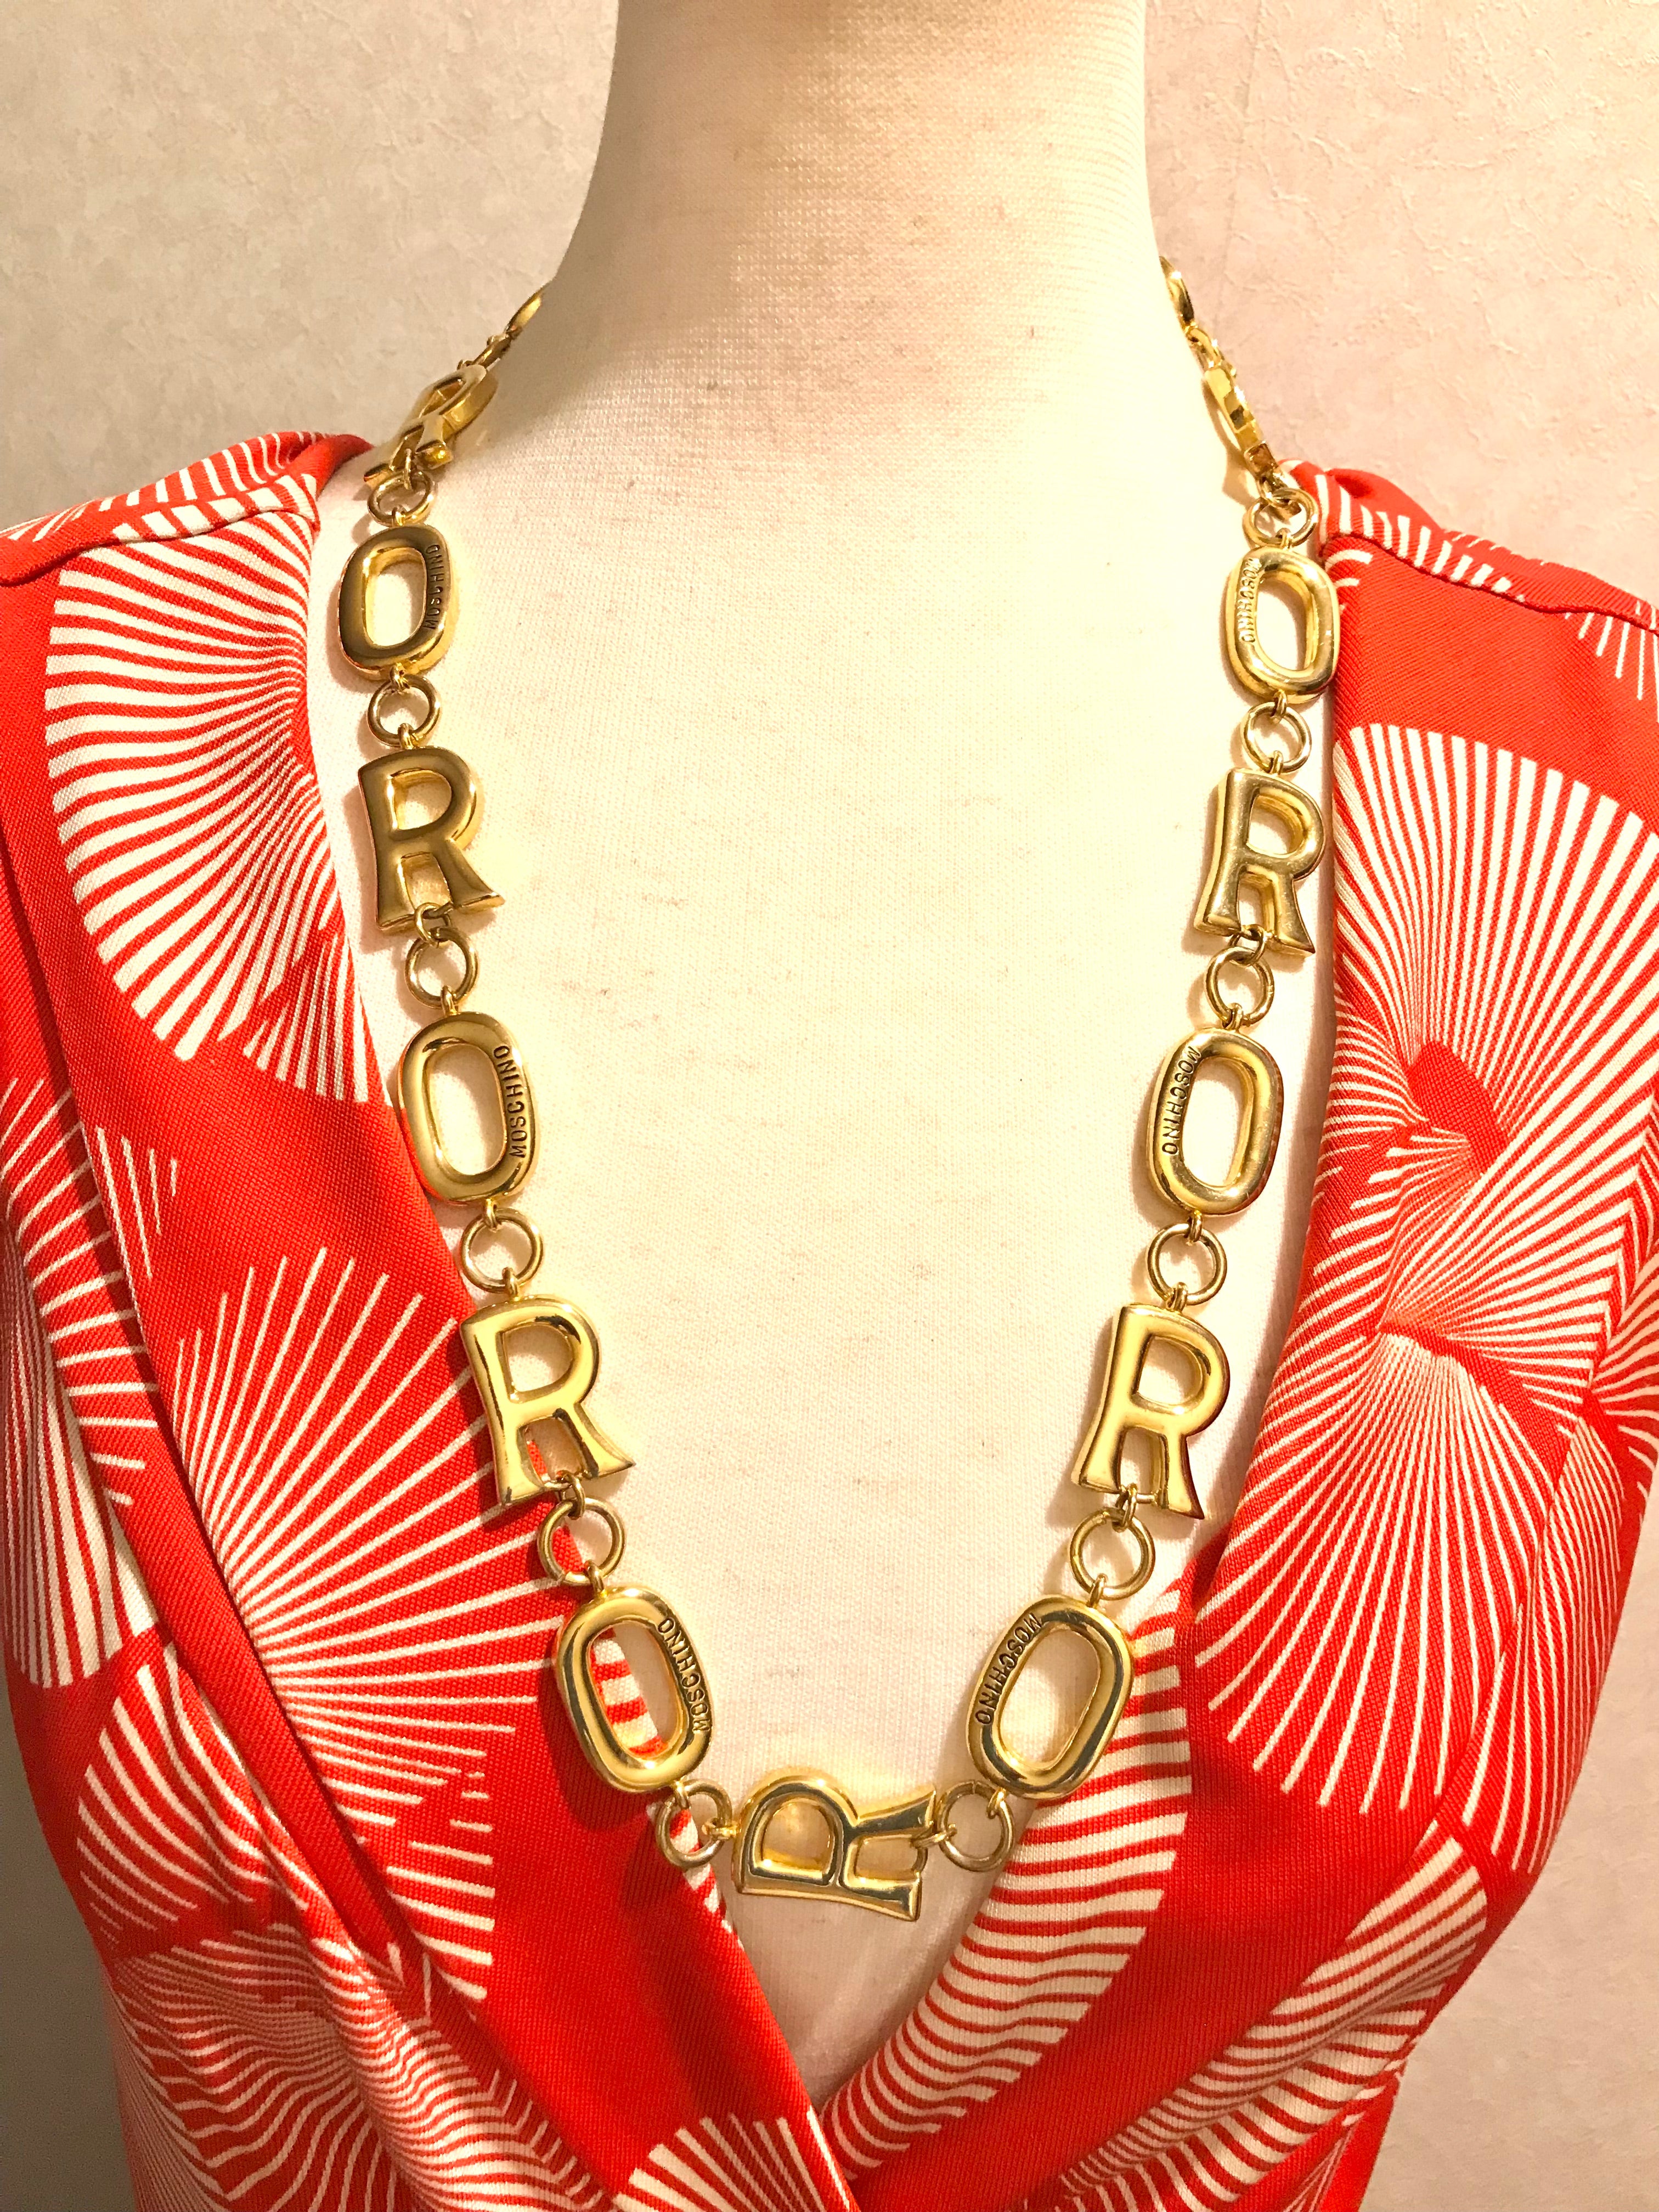 Vintage Moschino chain statement necklace with golden O and R letter charms with logos.